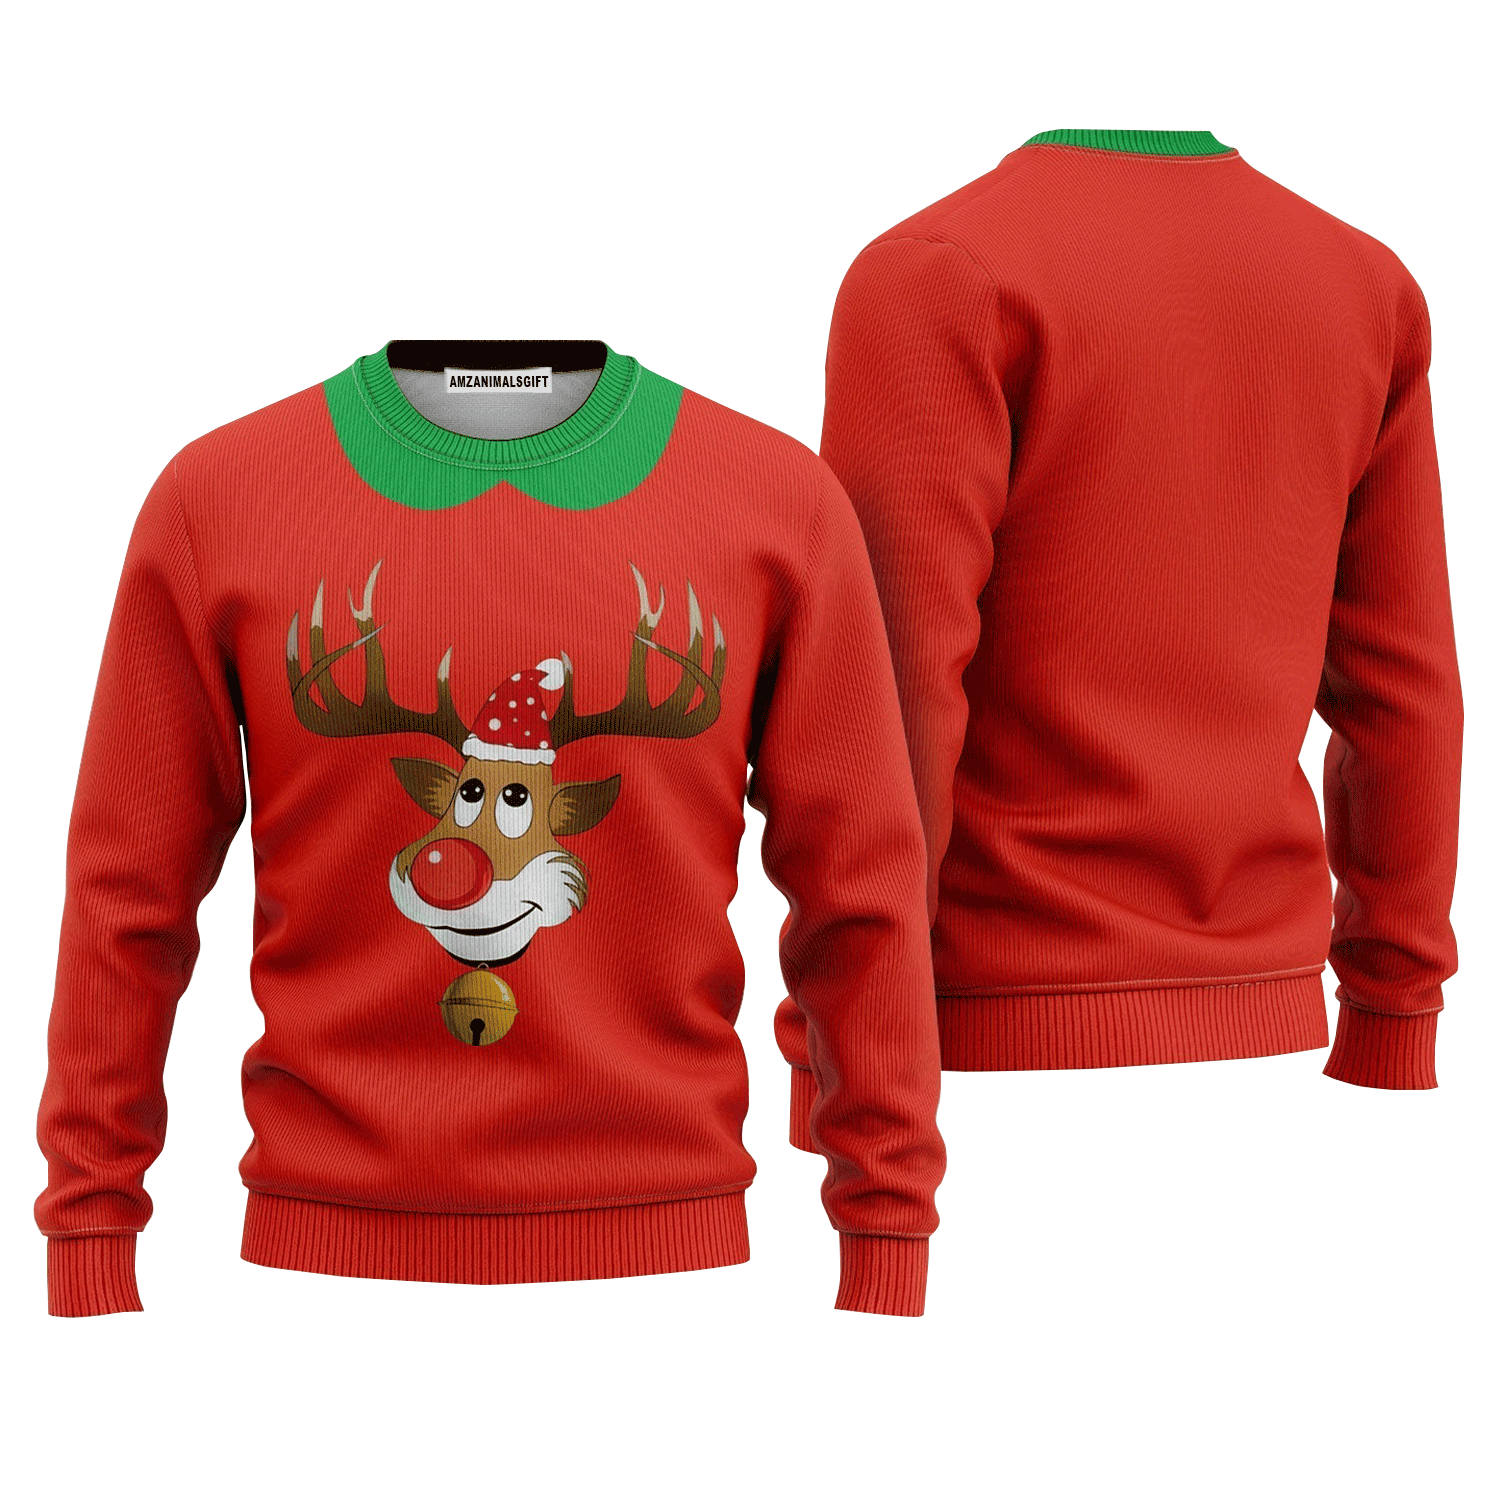 Cartoon ReinDeer Sweater Merry Christmas, Ugly Sweater For Men & Women, Perfect Outfit For Christmas New Year Autumn Winter